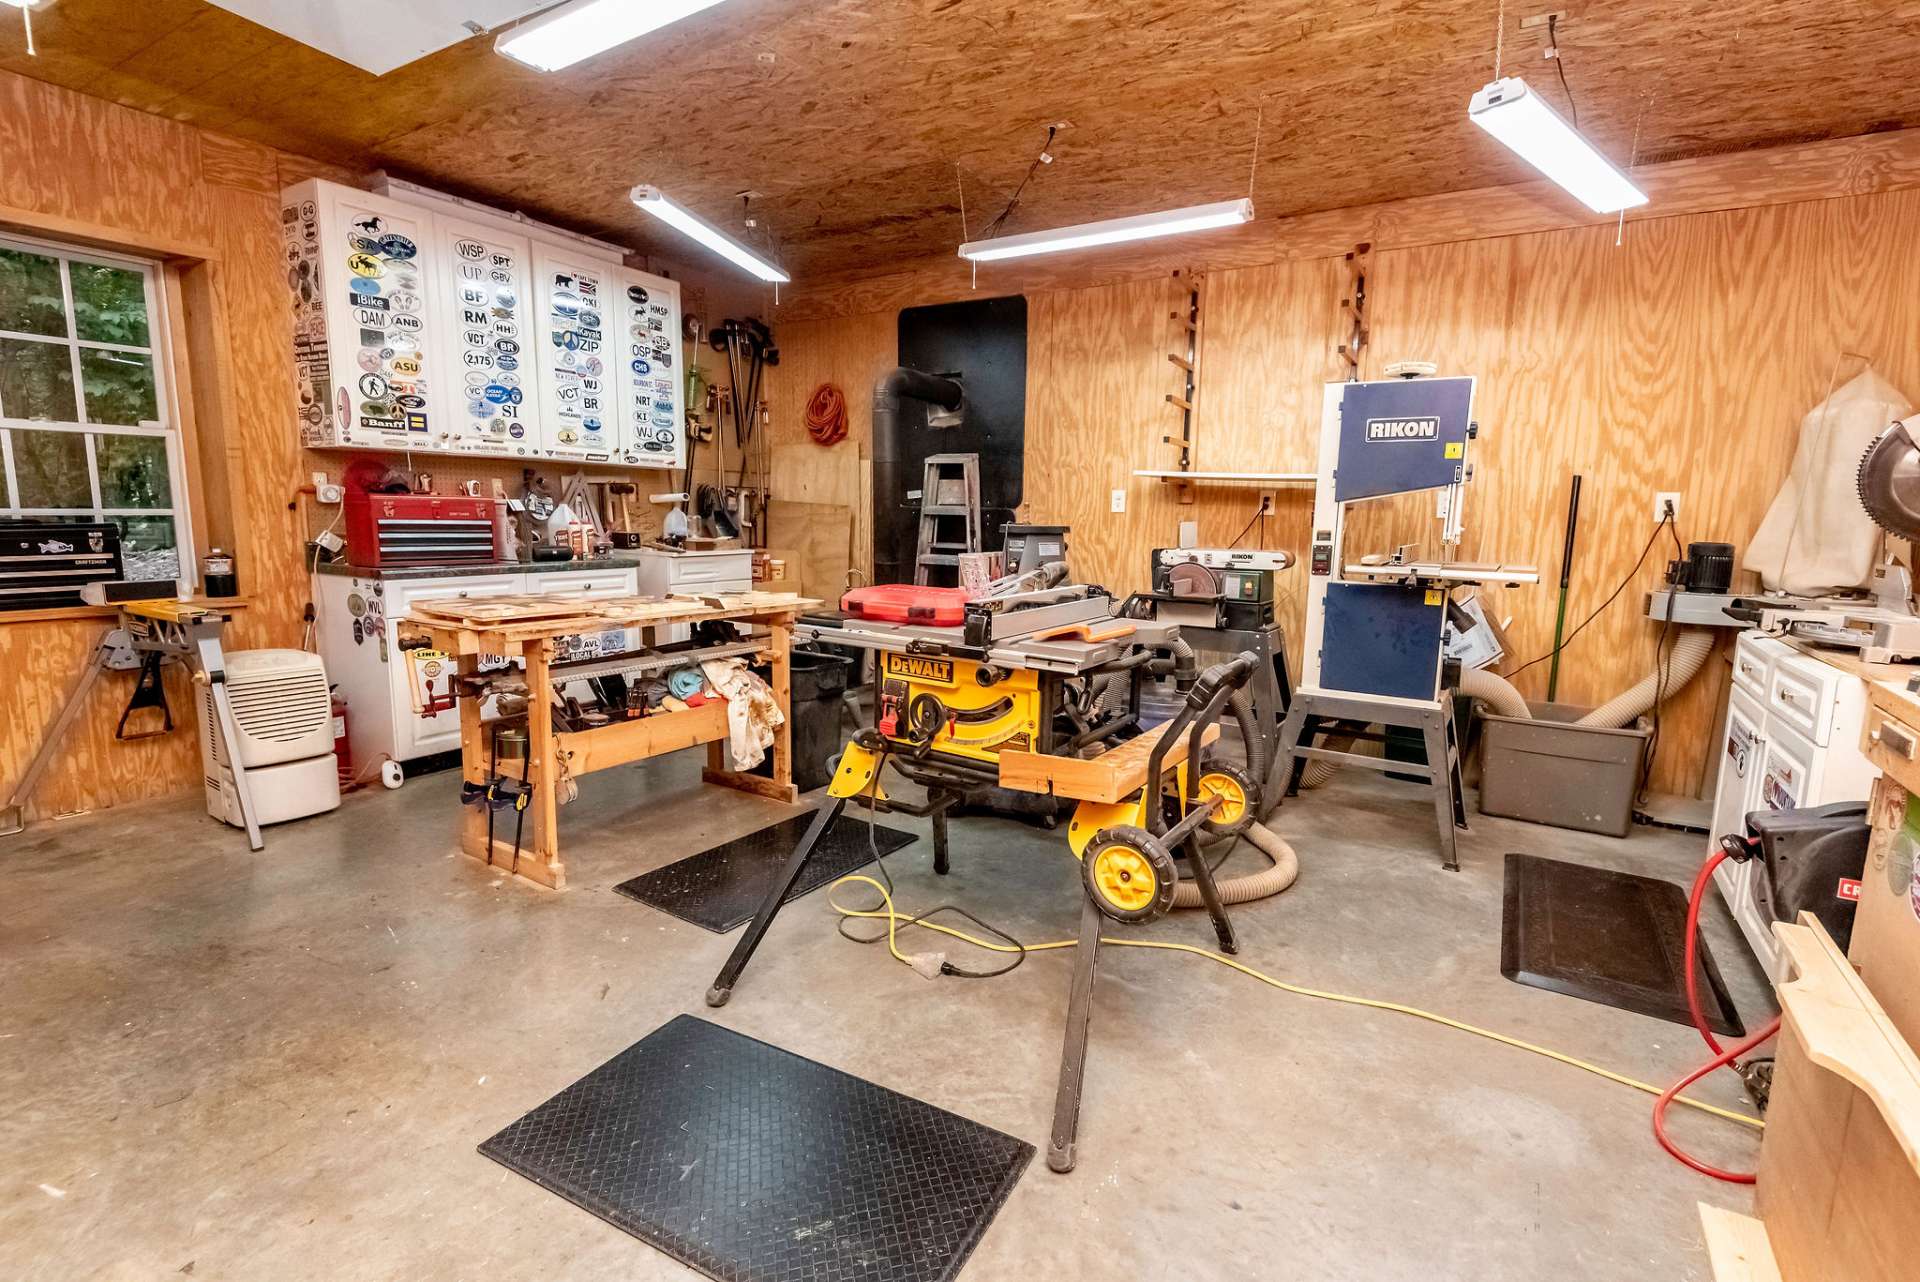 Currently being used as a workshop and could also be used as a game room, art studio, storage for all your mountain toys....endless possibilities.